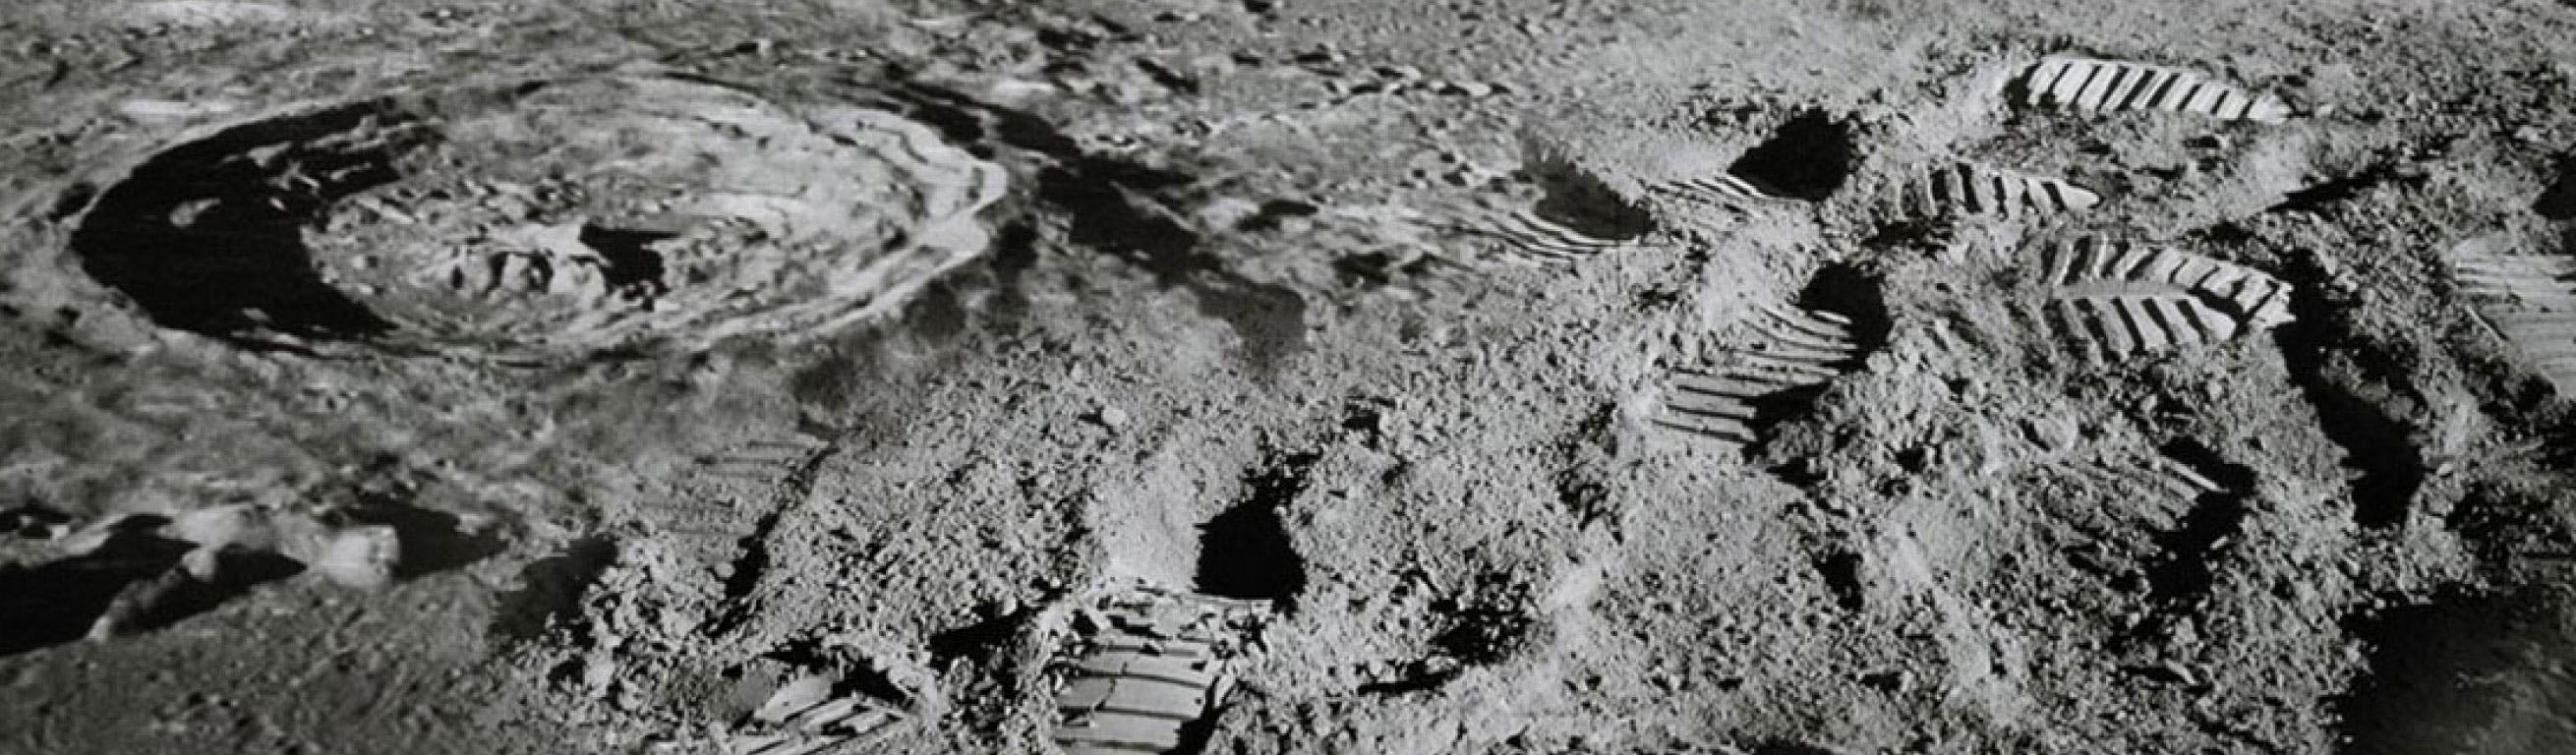 Footprints next to a moon crater.